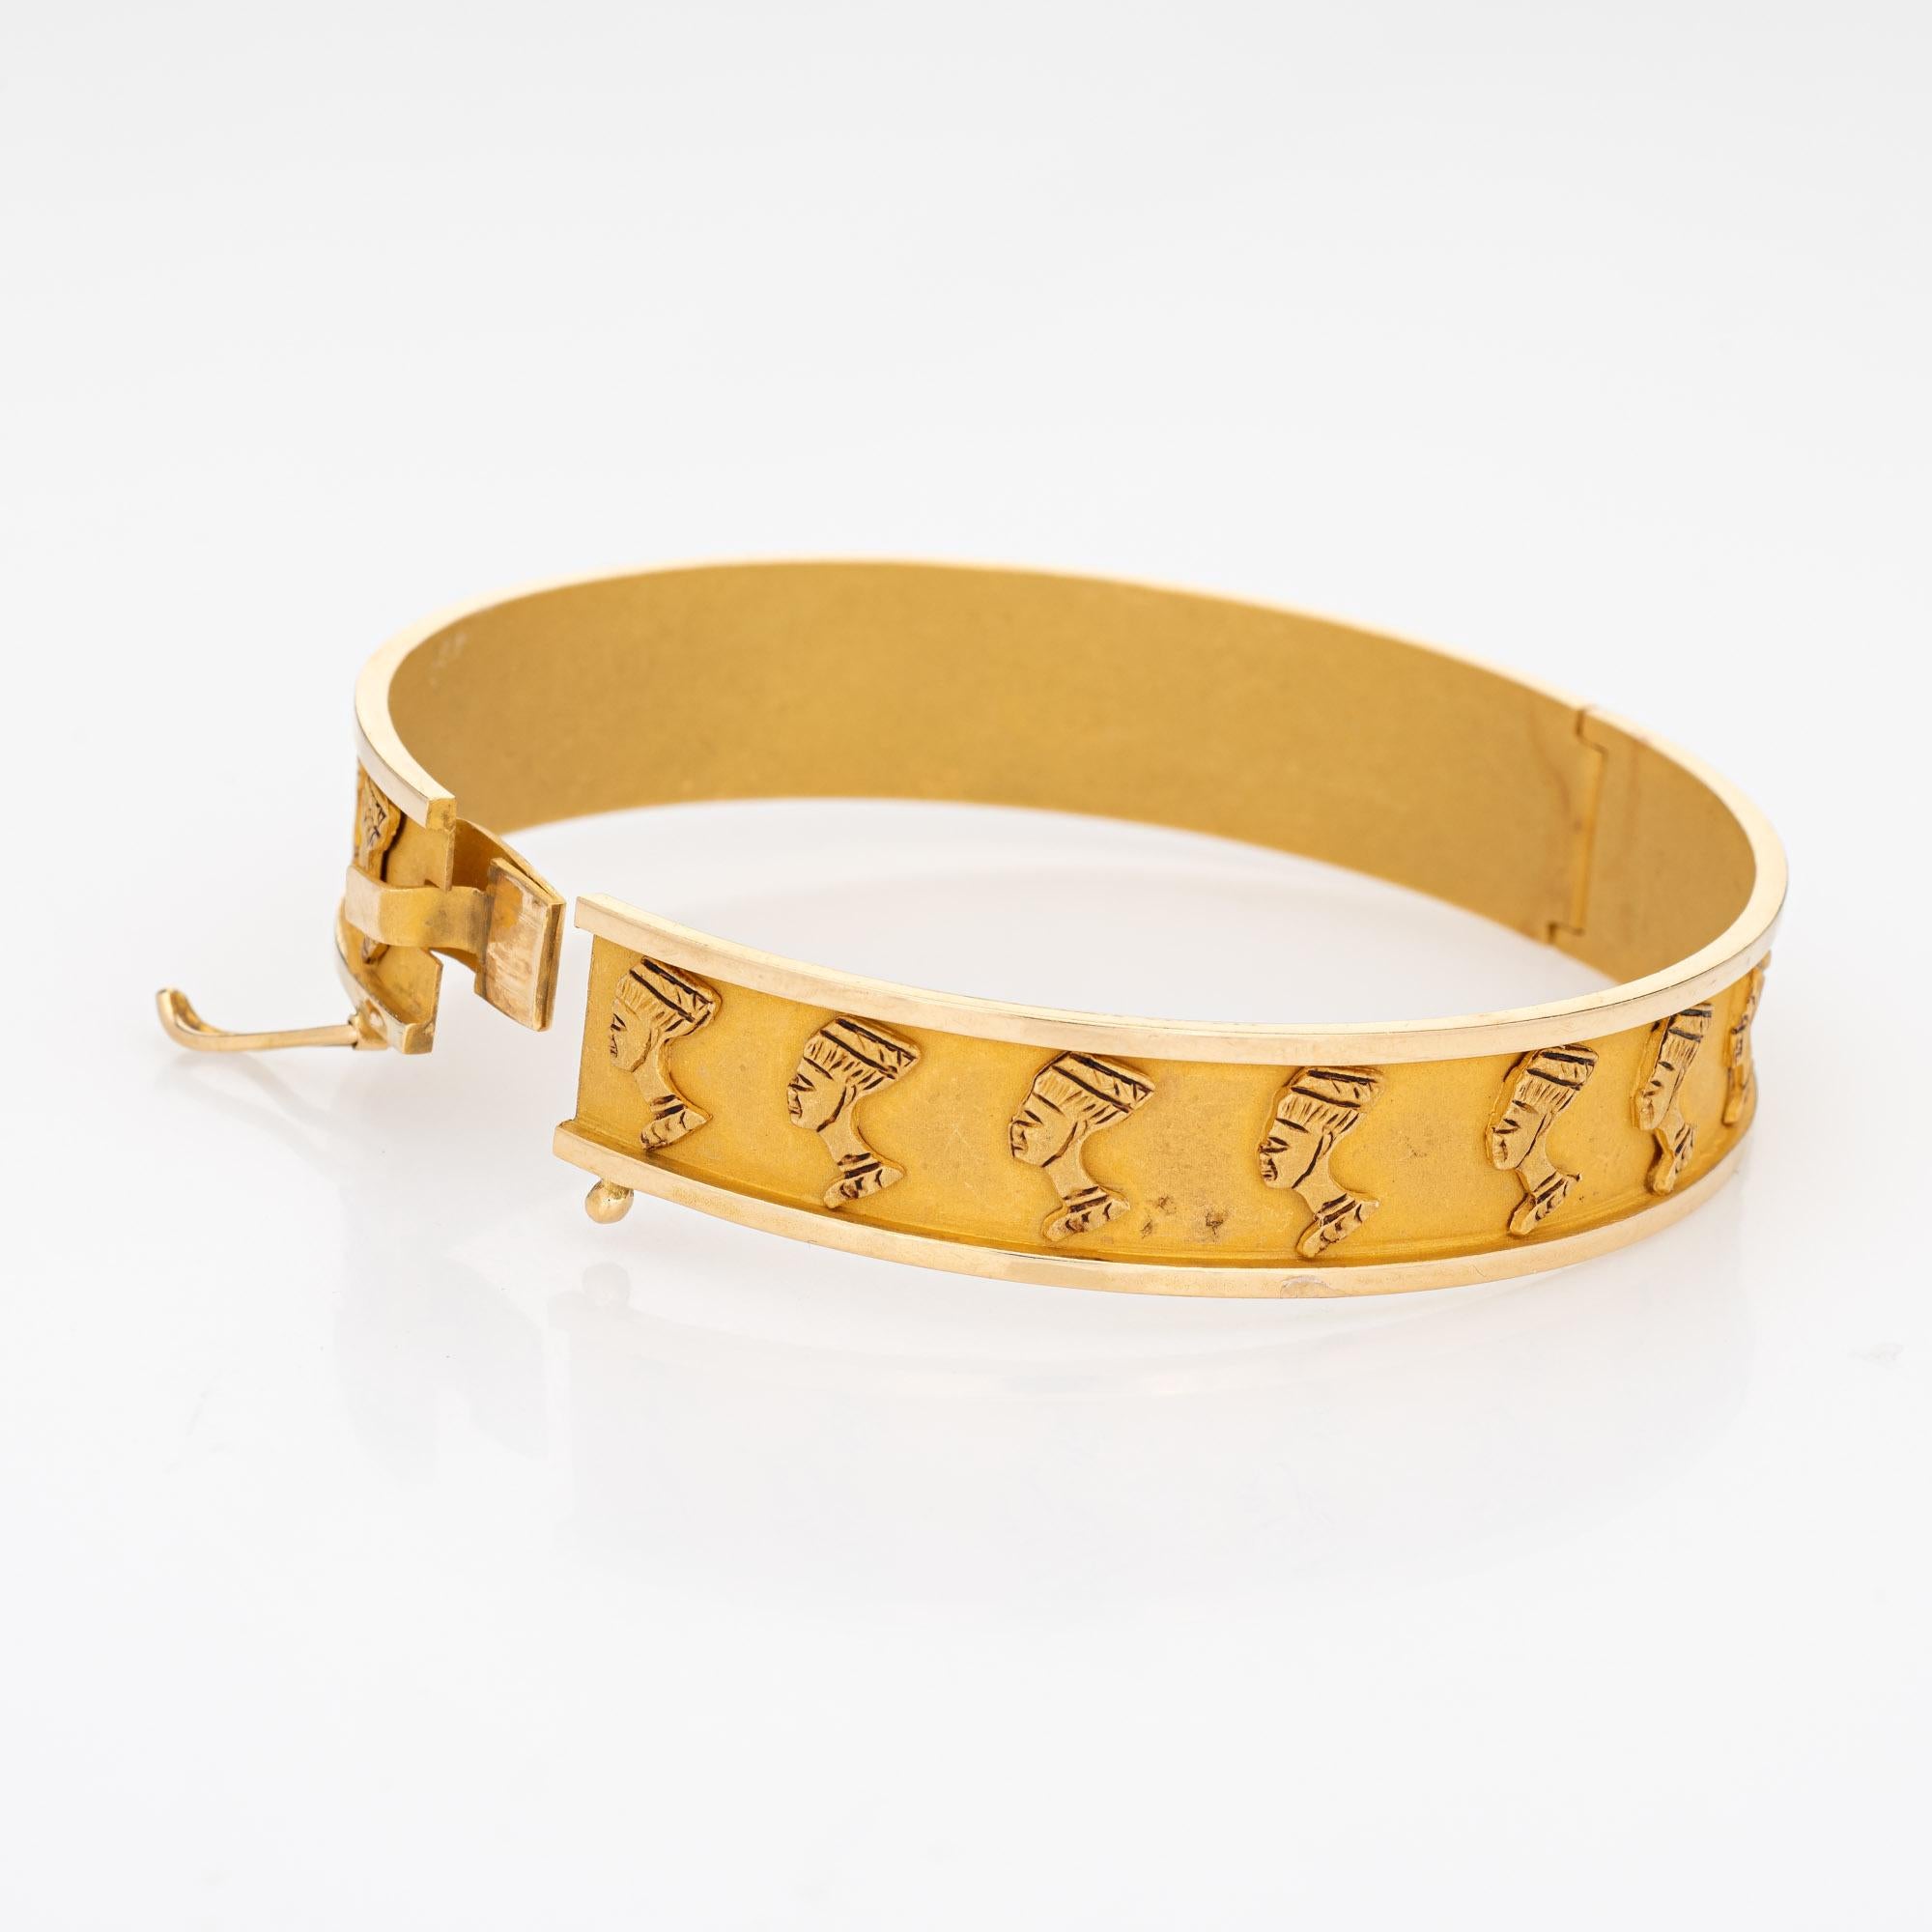 Stylish vintage Nefertiti bracelet crafted in 18k yellow gold.  

The distinct Egyptian themed bracelet features the bust of Nefertiti repeating around the entire circumference of the bracelet. The matte finish allows for a muted gold effect. The